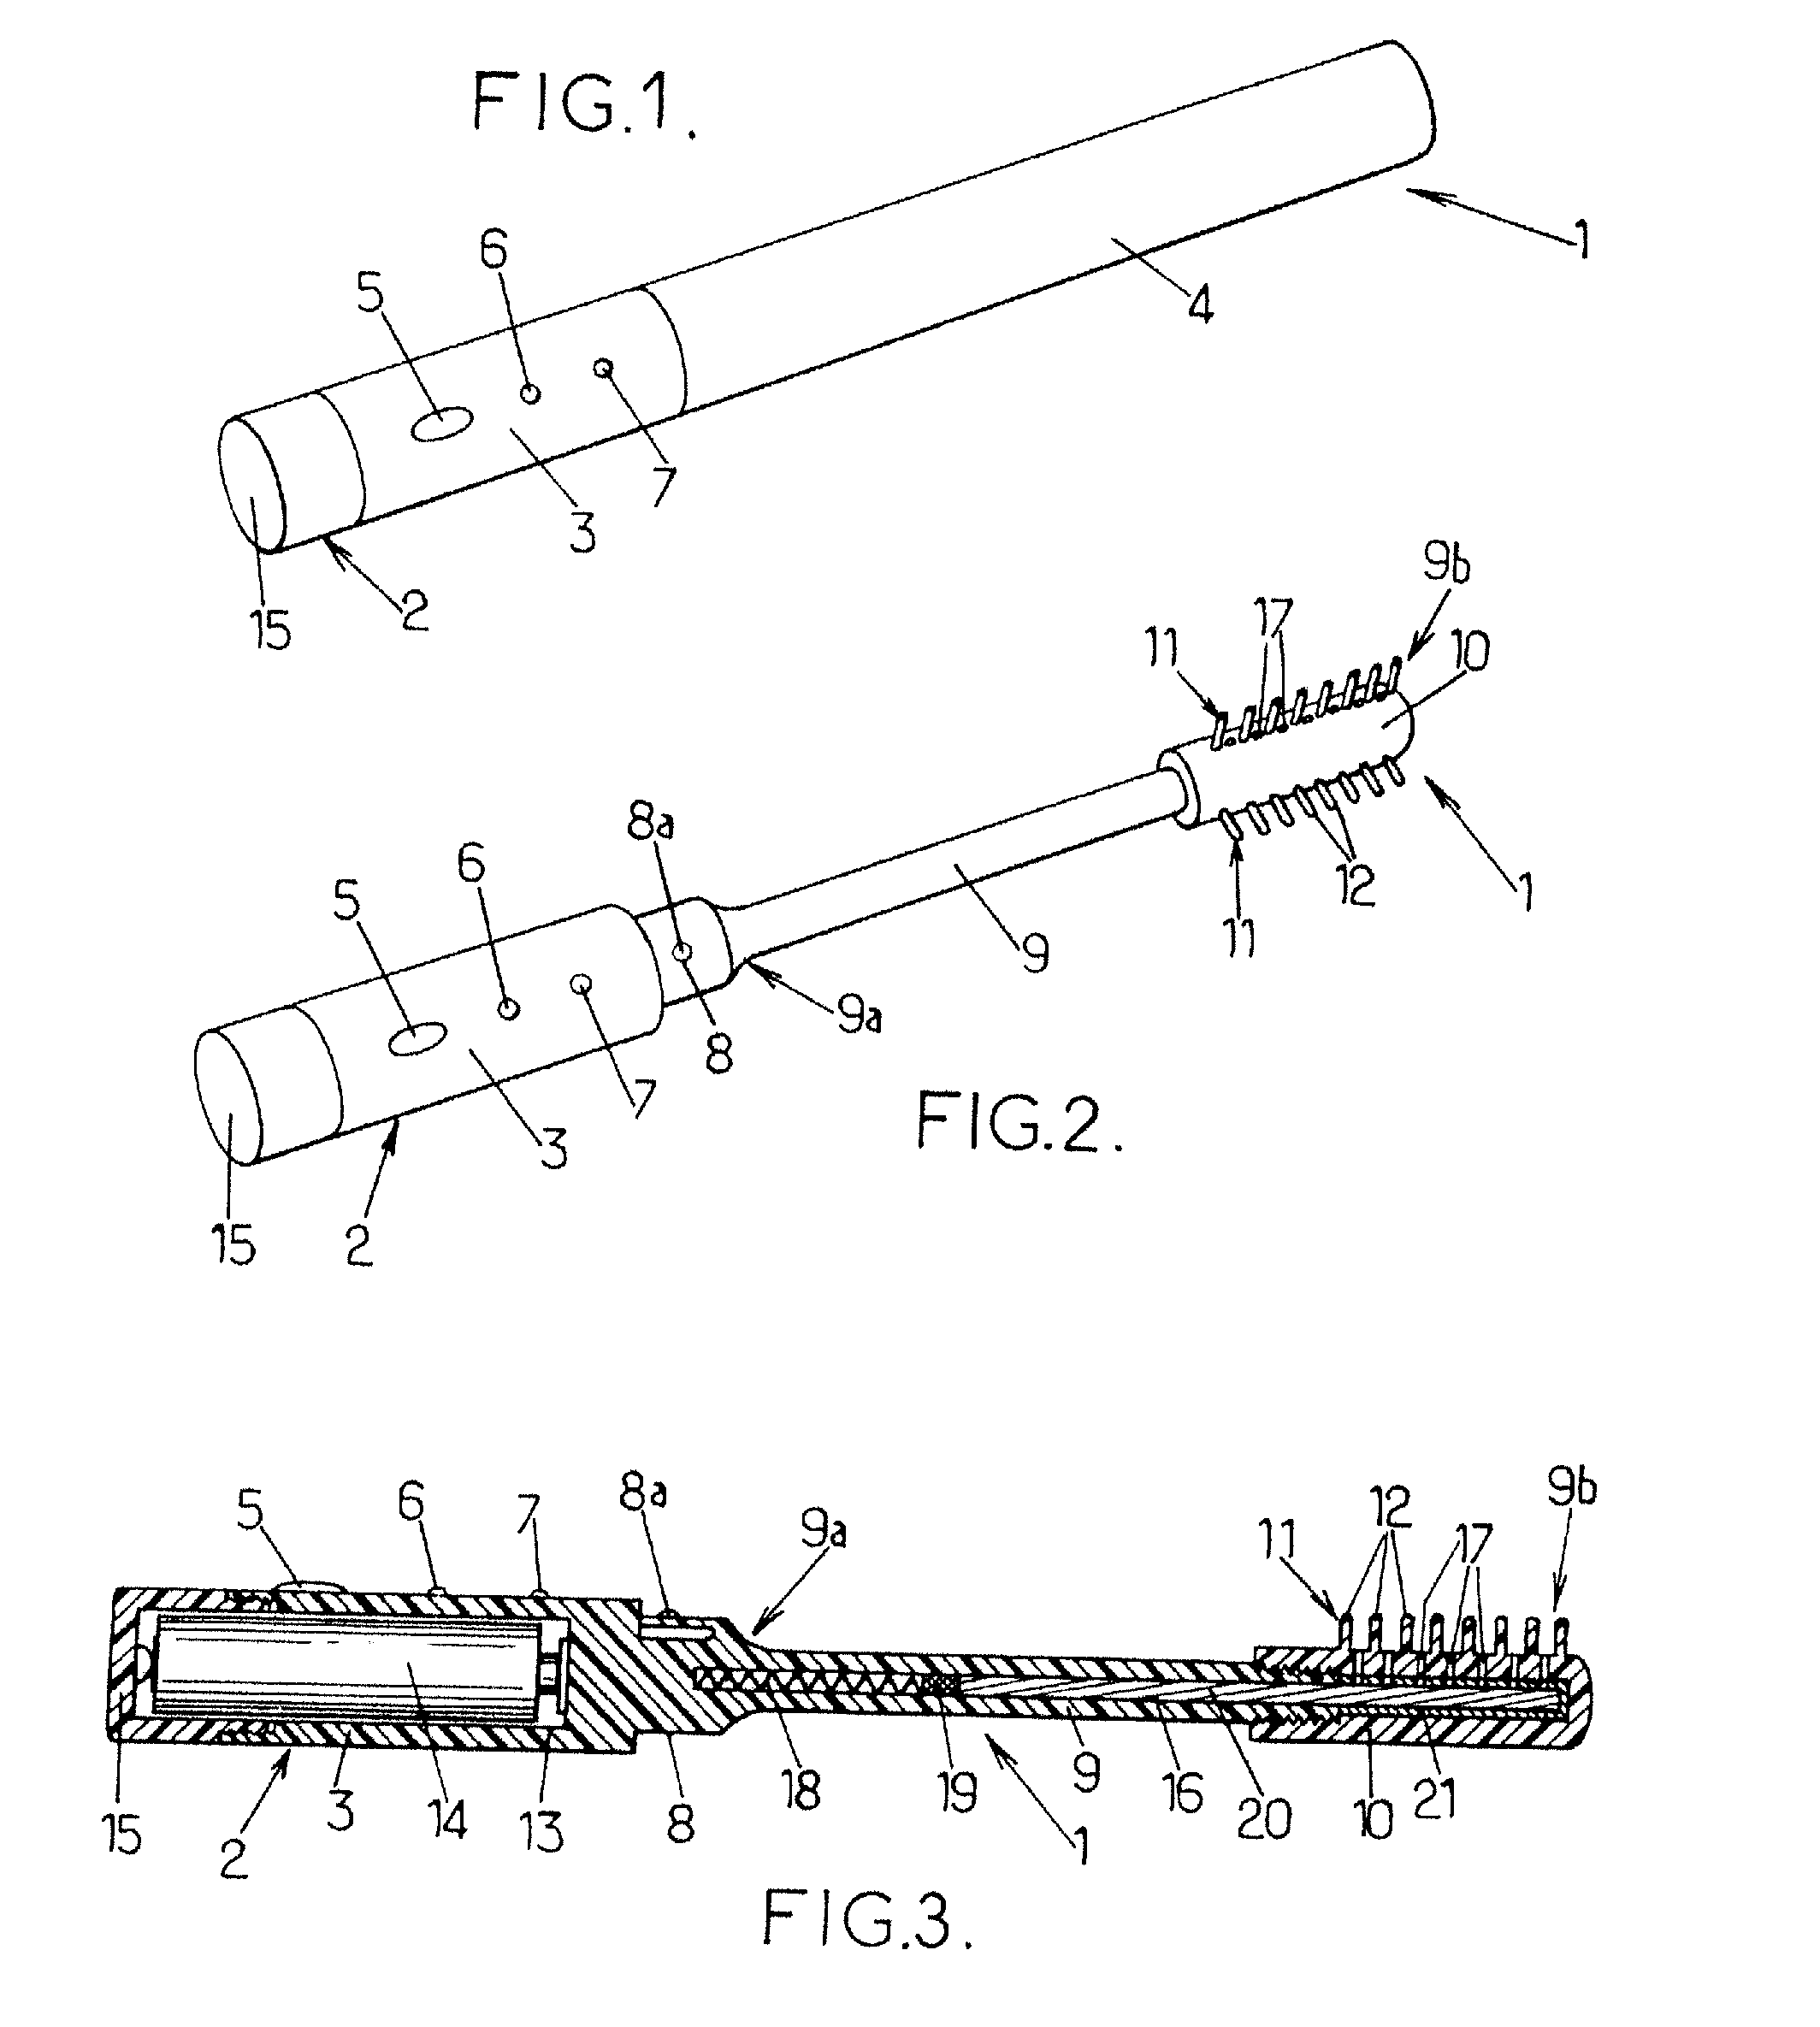 Applicator device for applying a cosmetic and the use of such a device